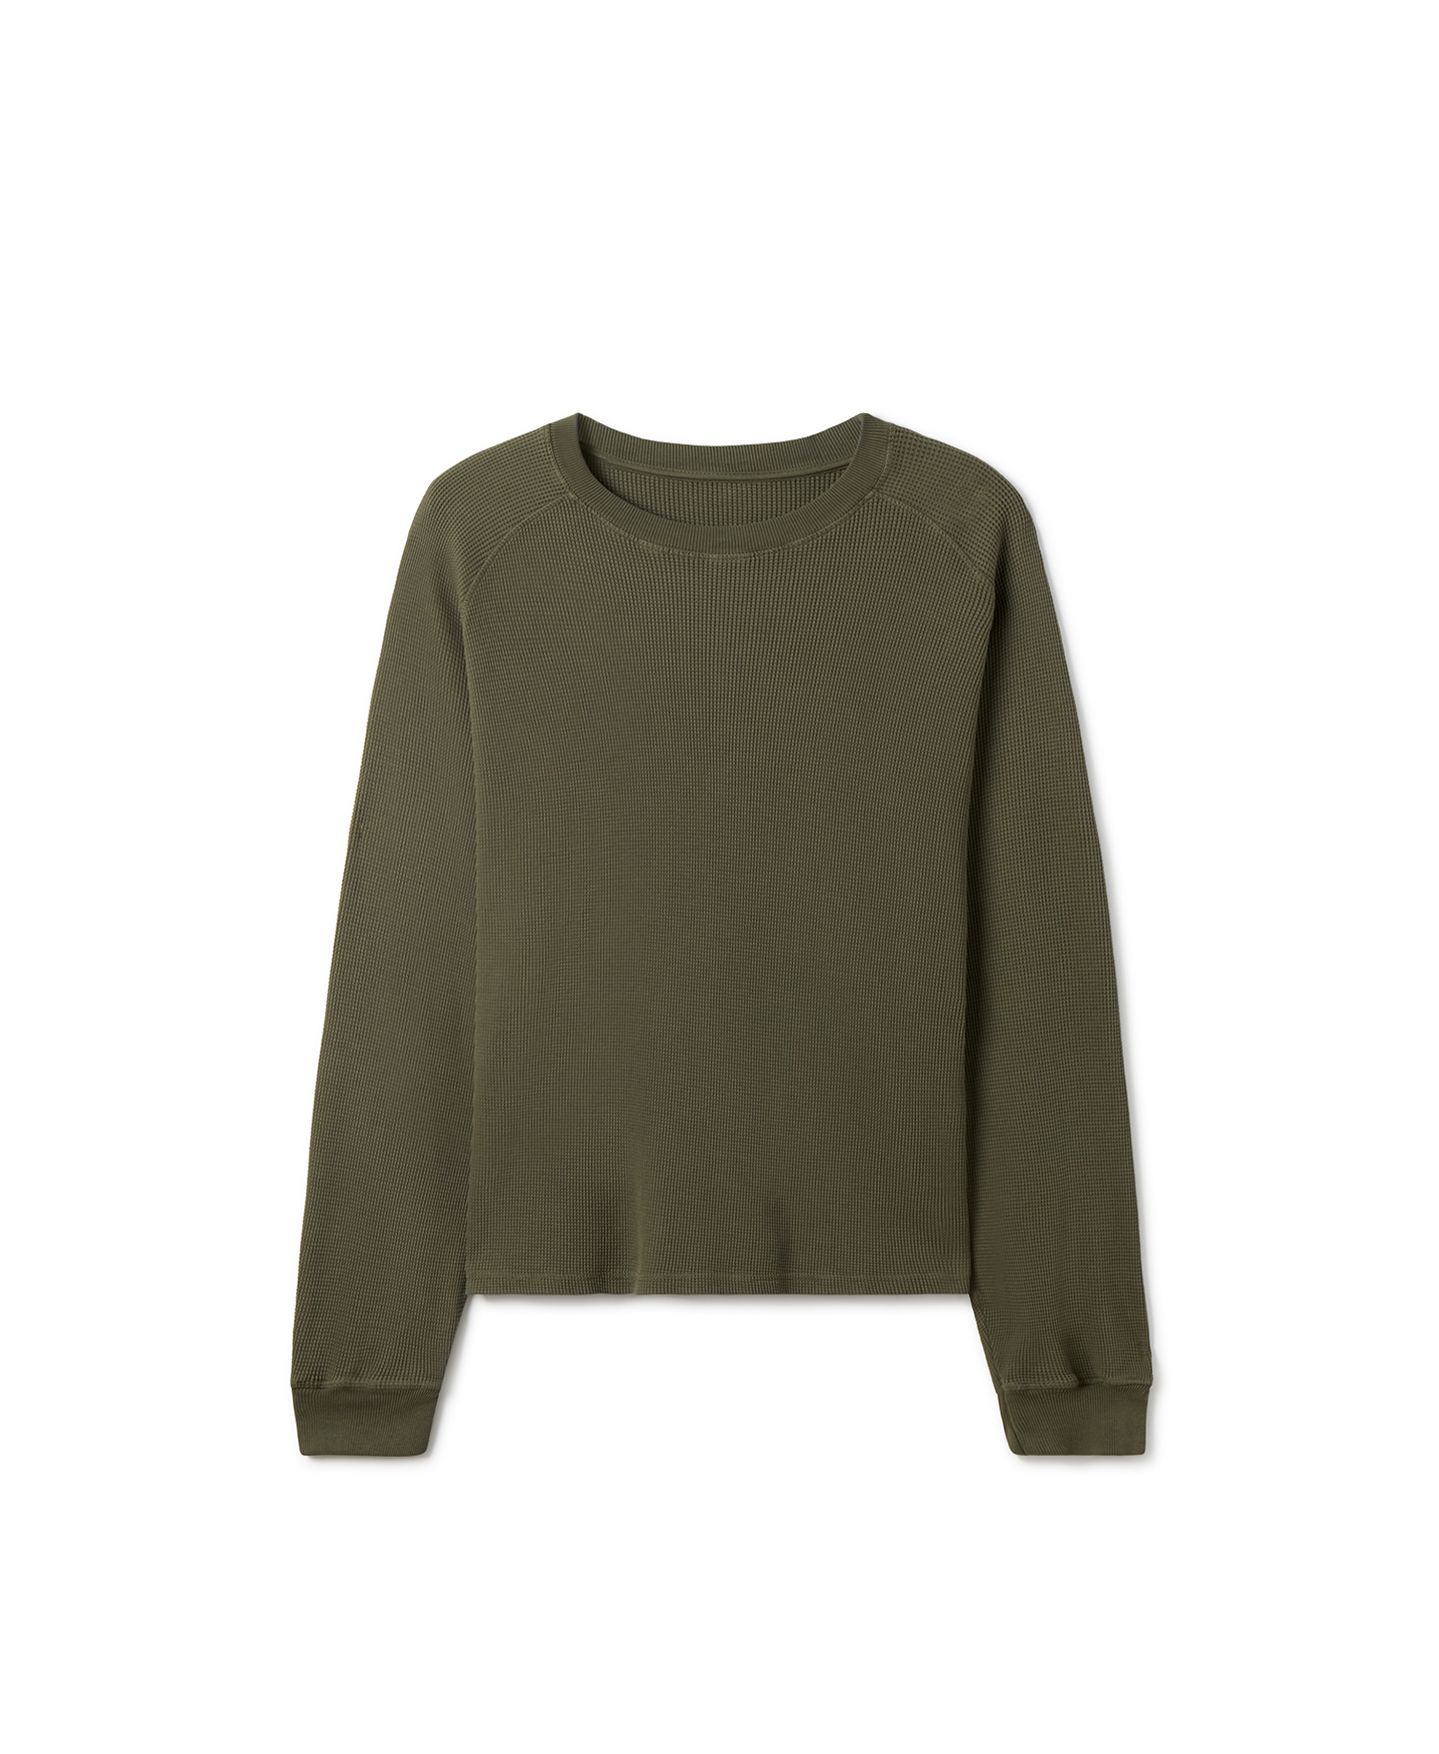 350 GSM 'Army Olive' Thermal Longsleeve